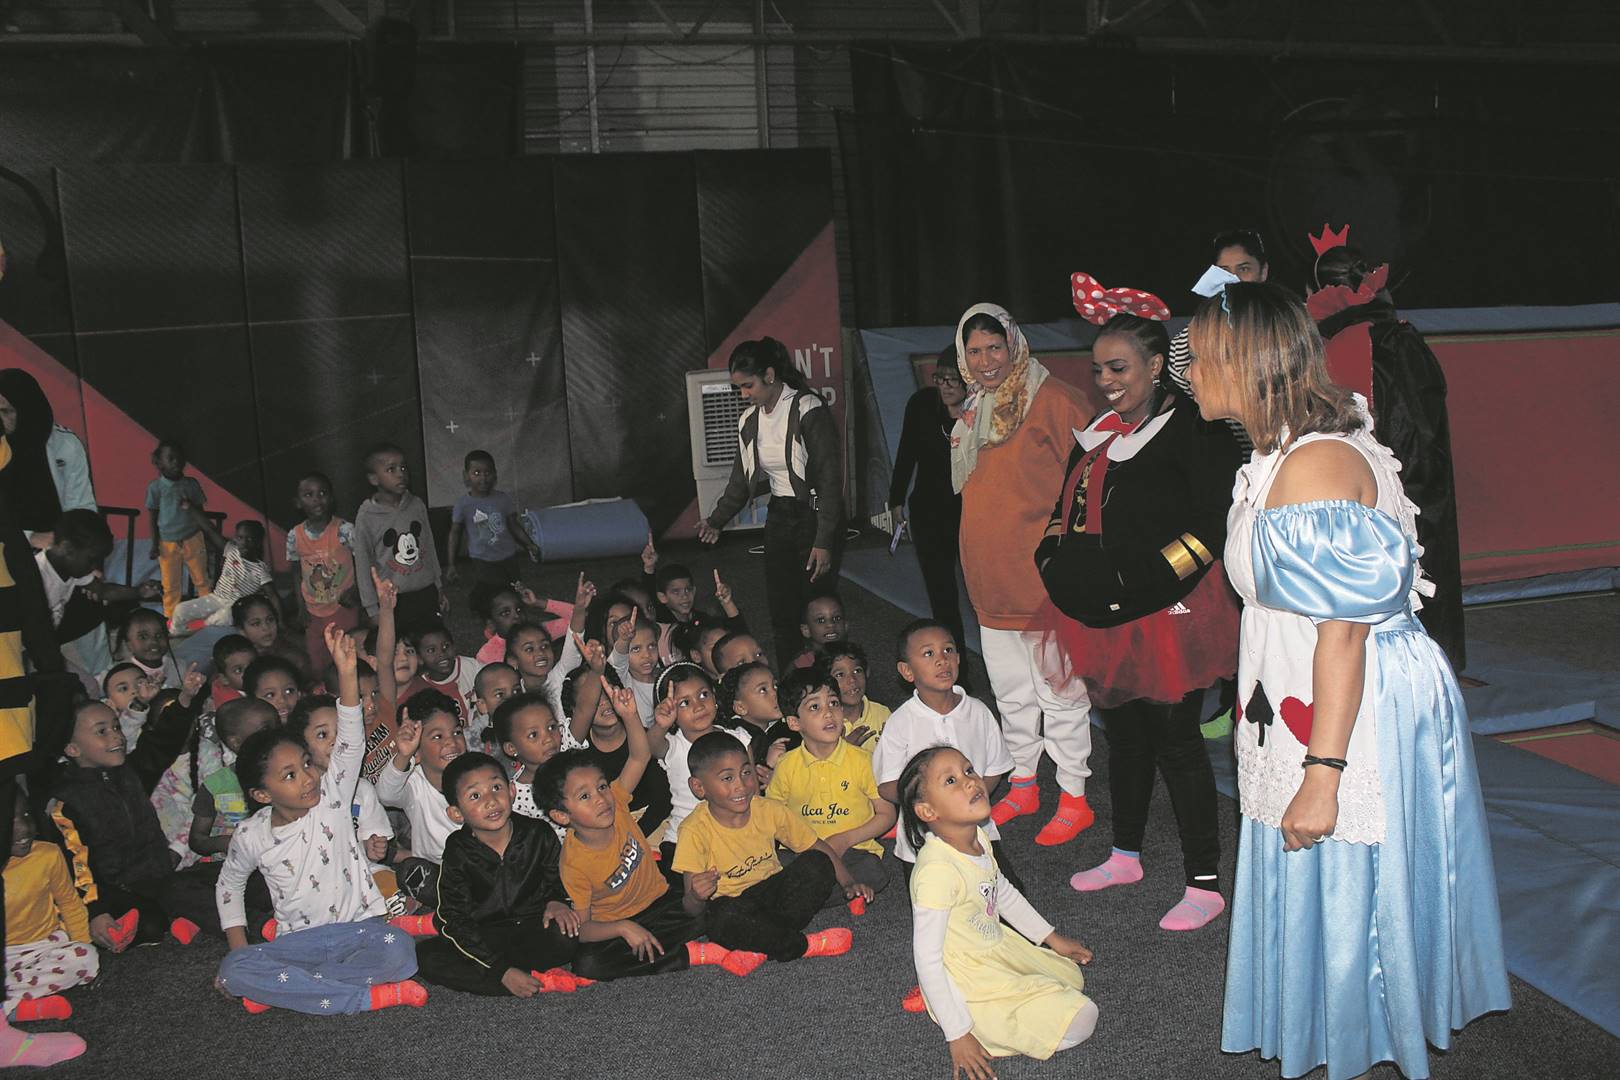 Nuhaa Portland, dressed up as Alice in the book Alice in Wonderland, delightfully caught the attention of all the Grade R learners in song, obediently containing their excitement while playing at Rush Claremont.